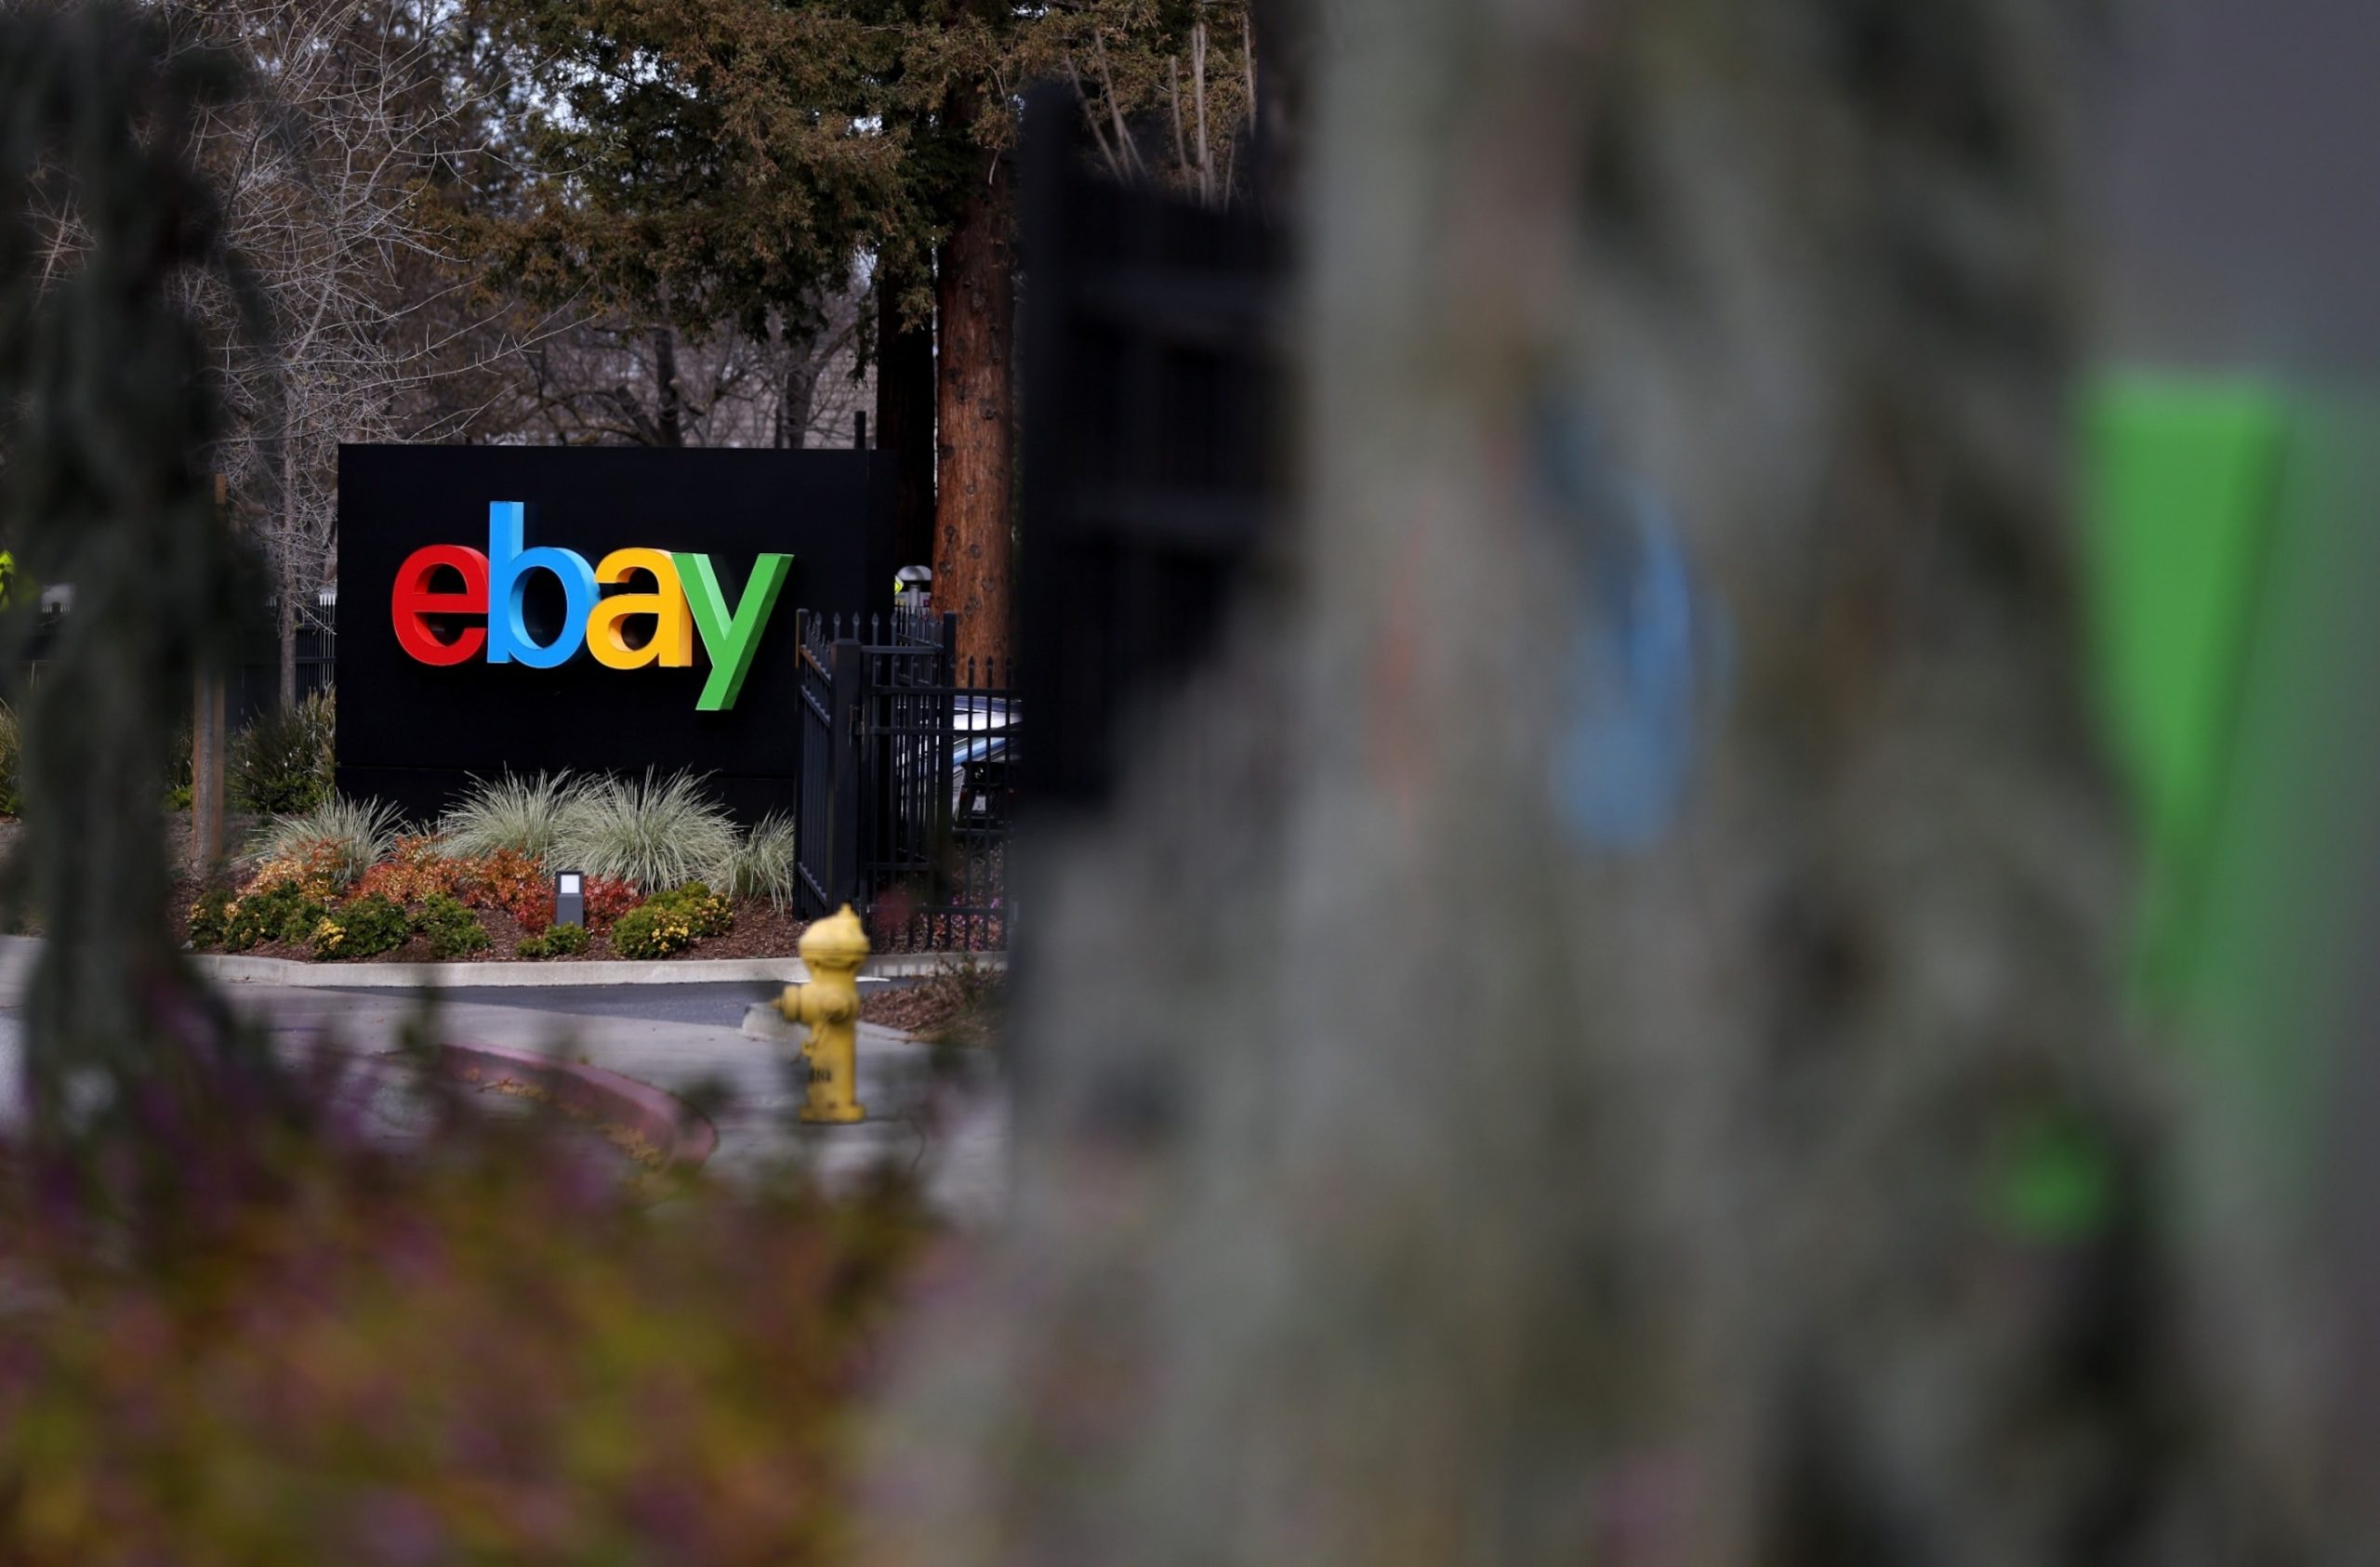 eBay Set to Compensate Massachusetts Couple with $3 Million for Harassment Related to Newsletter